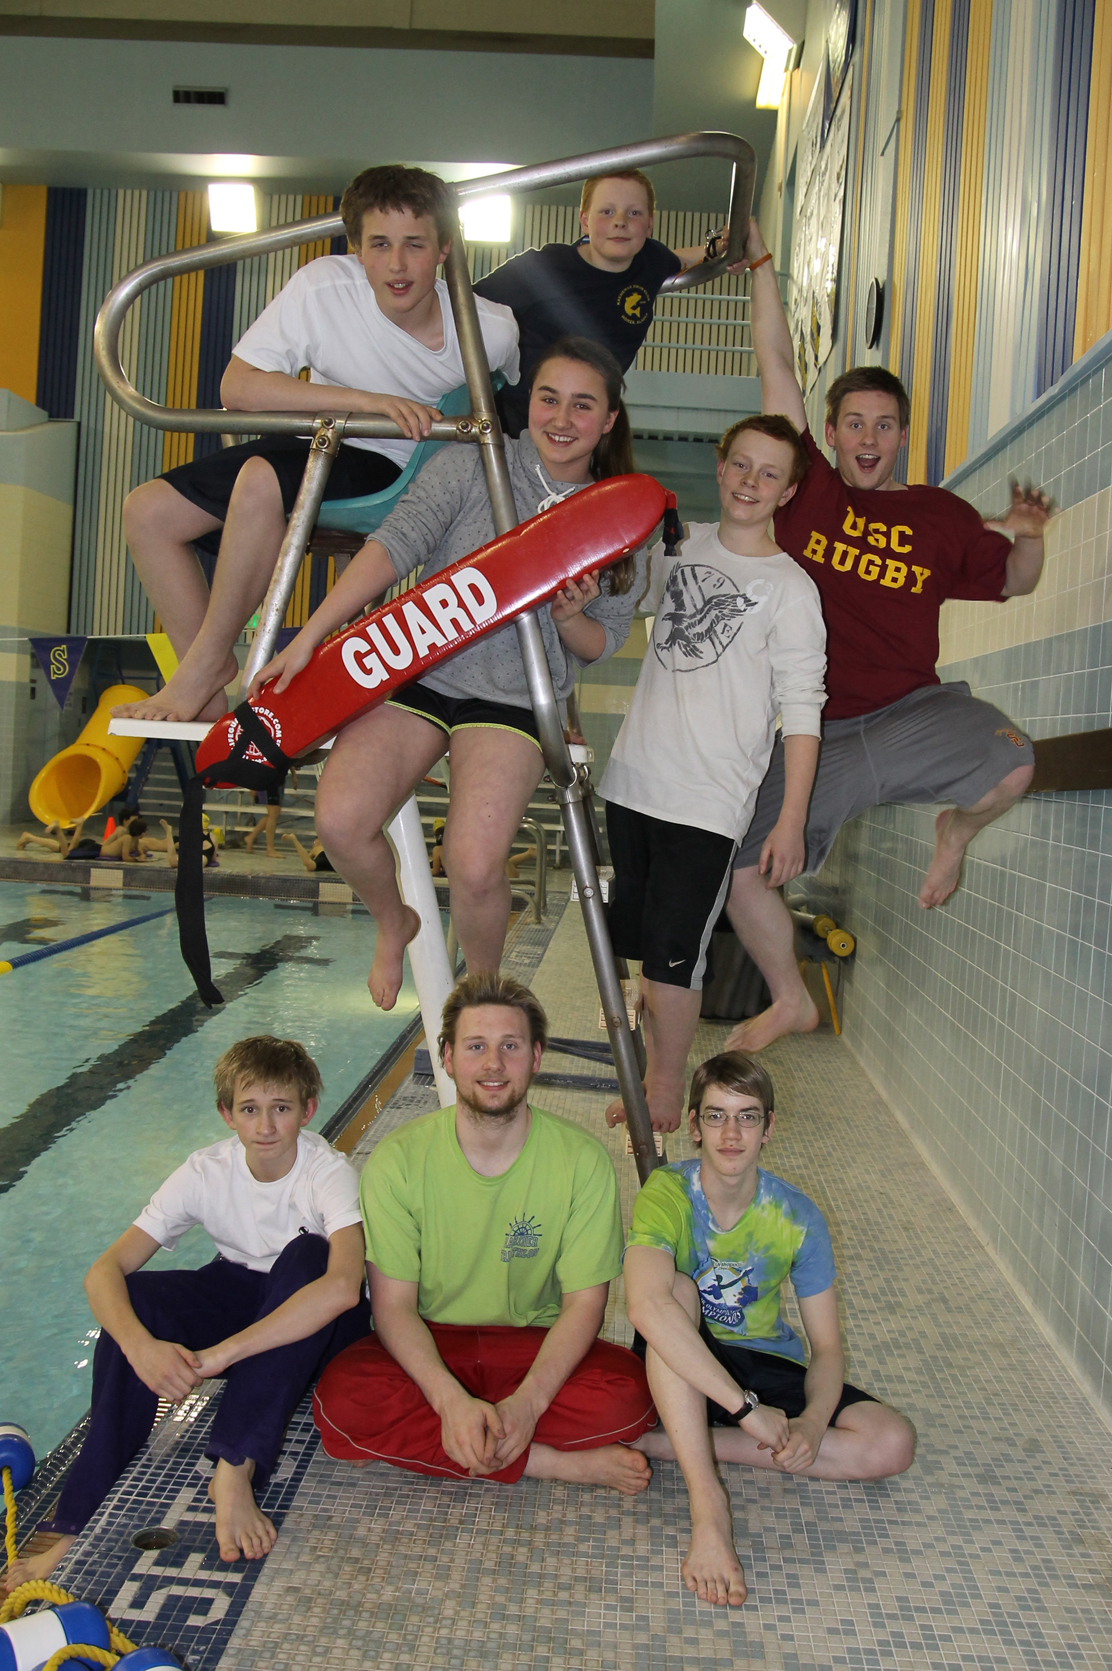 Junior Olympics athletes, clockwise from top left, are Remi Nagle, Theodore Castellani, Lauren Kuhns, Leo Castellani, Mark Nagle, Cyrus Cowan, James Nagle and Griffin Downey. Not pictured are Clayton Ardnt and Emmett Wilkinson.-Photo provided